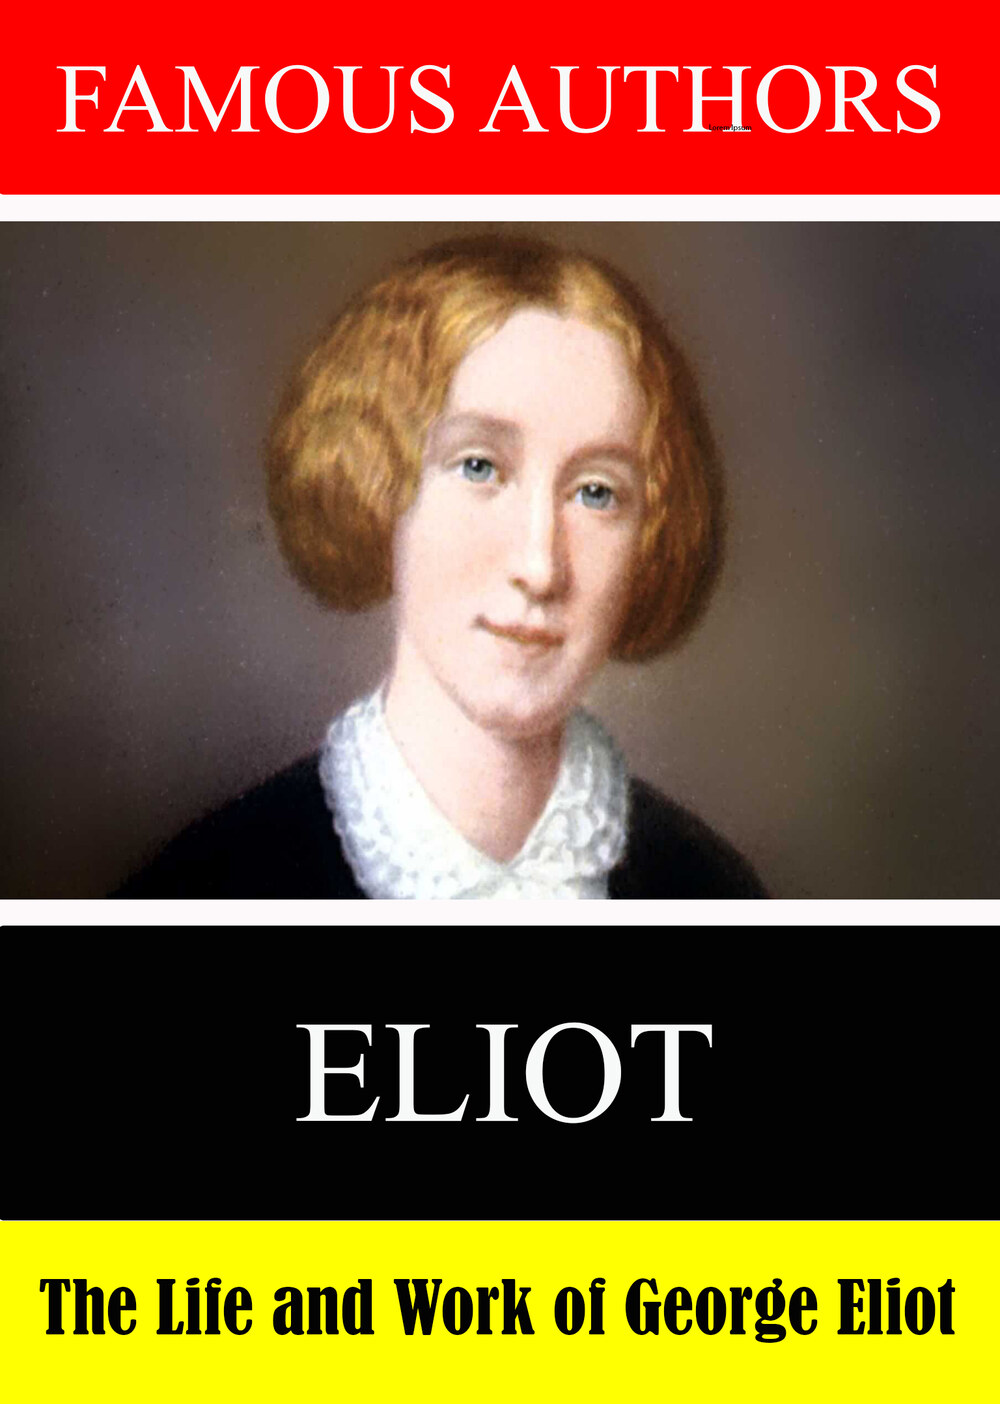 L7881 - Famous Authors: The Life and Work of George Eliot